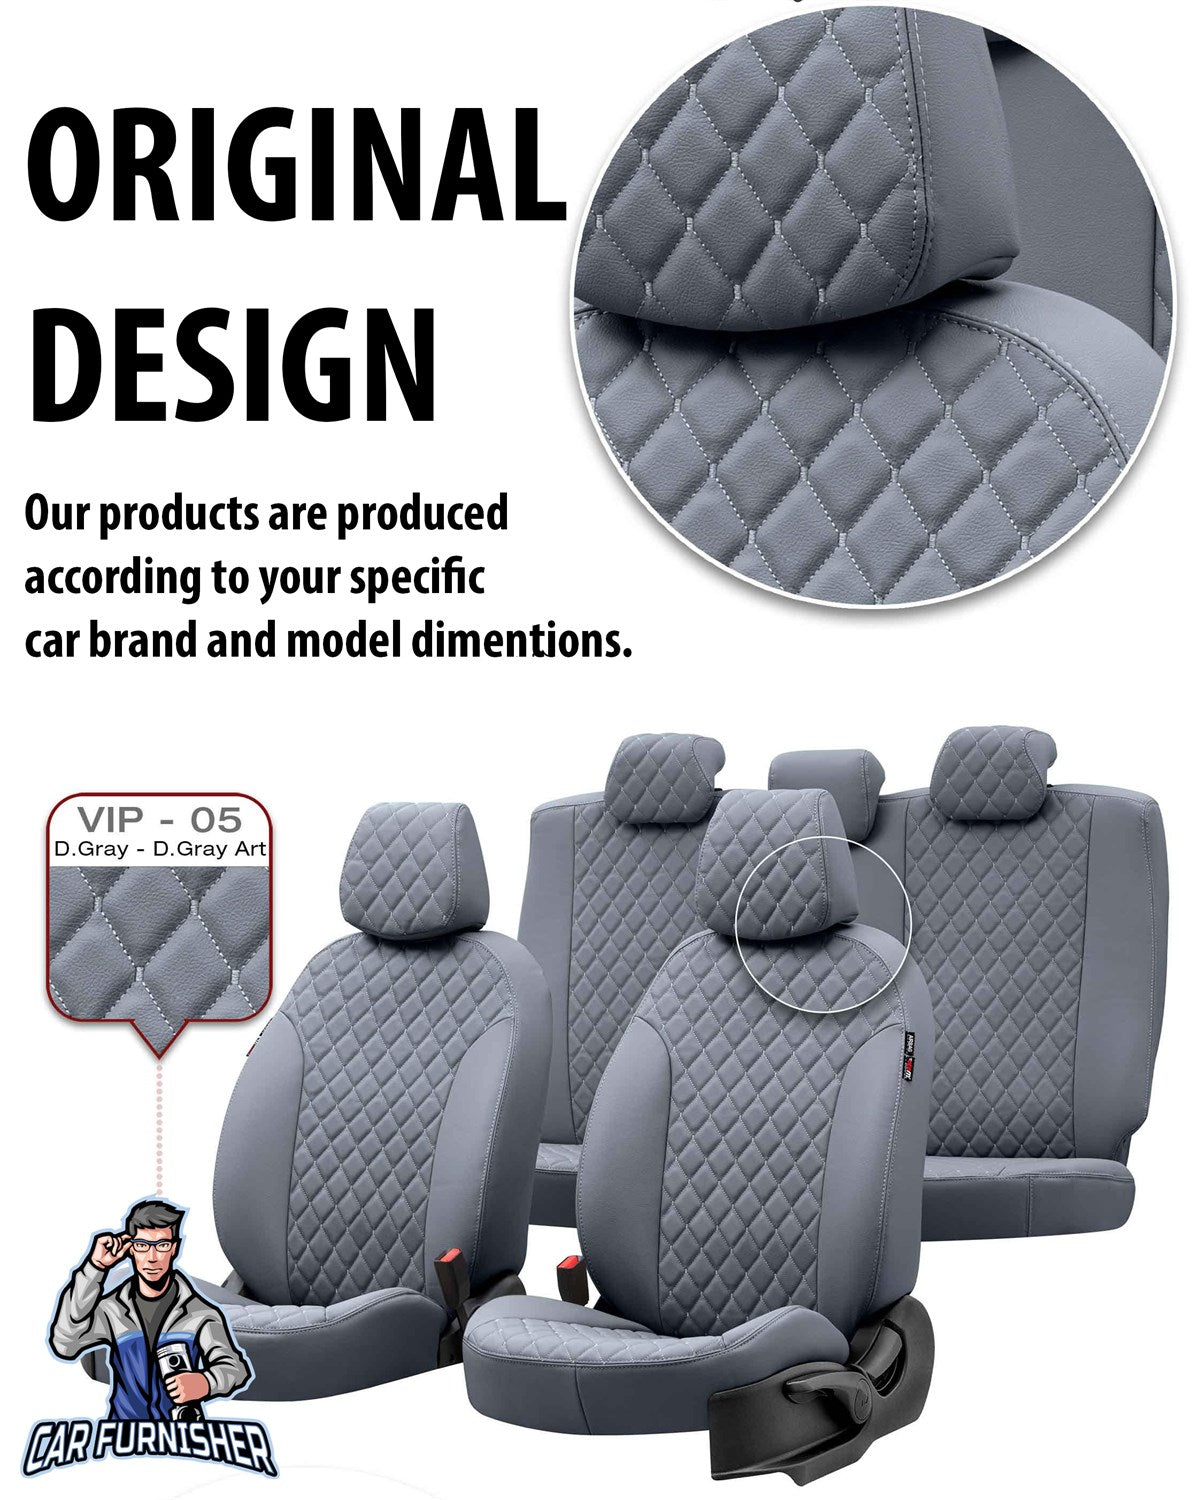 Citroen C3 Seat Covers Madrid Leather Design Smoked Leather